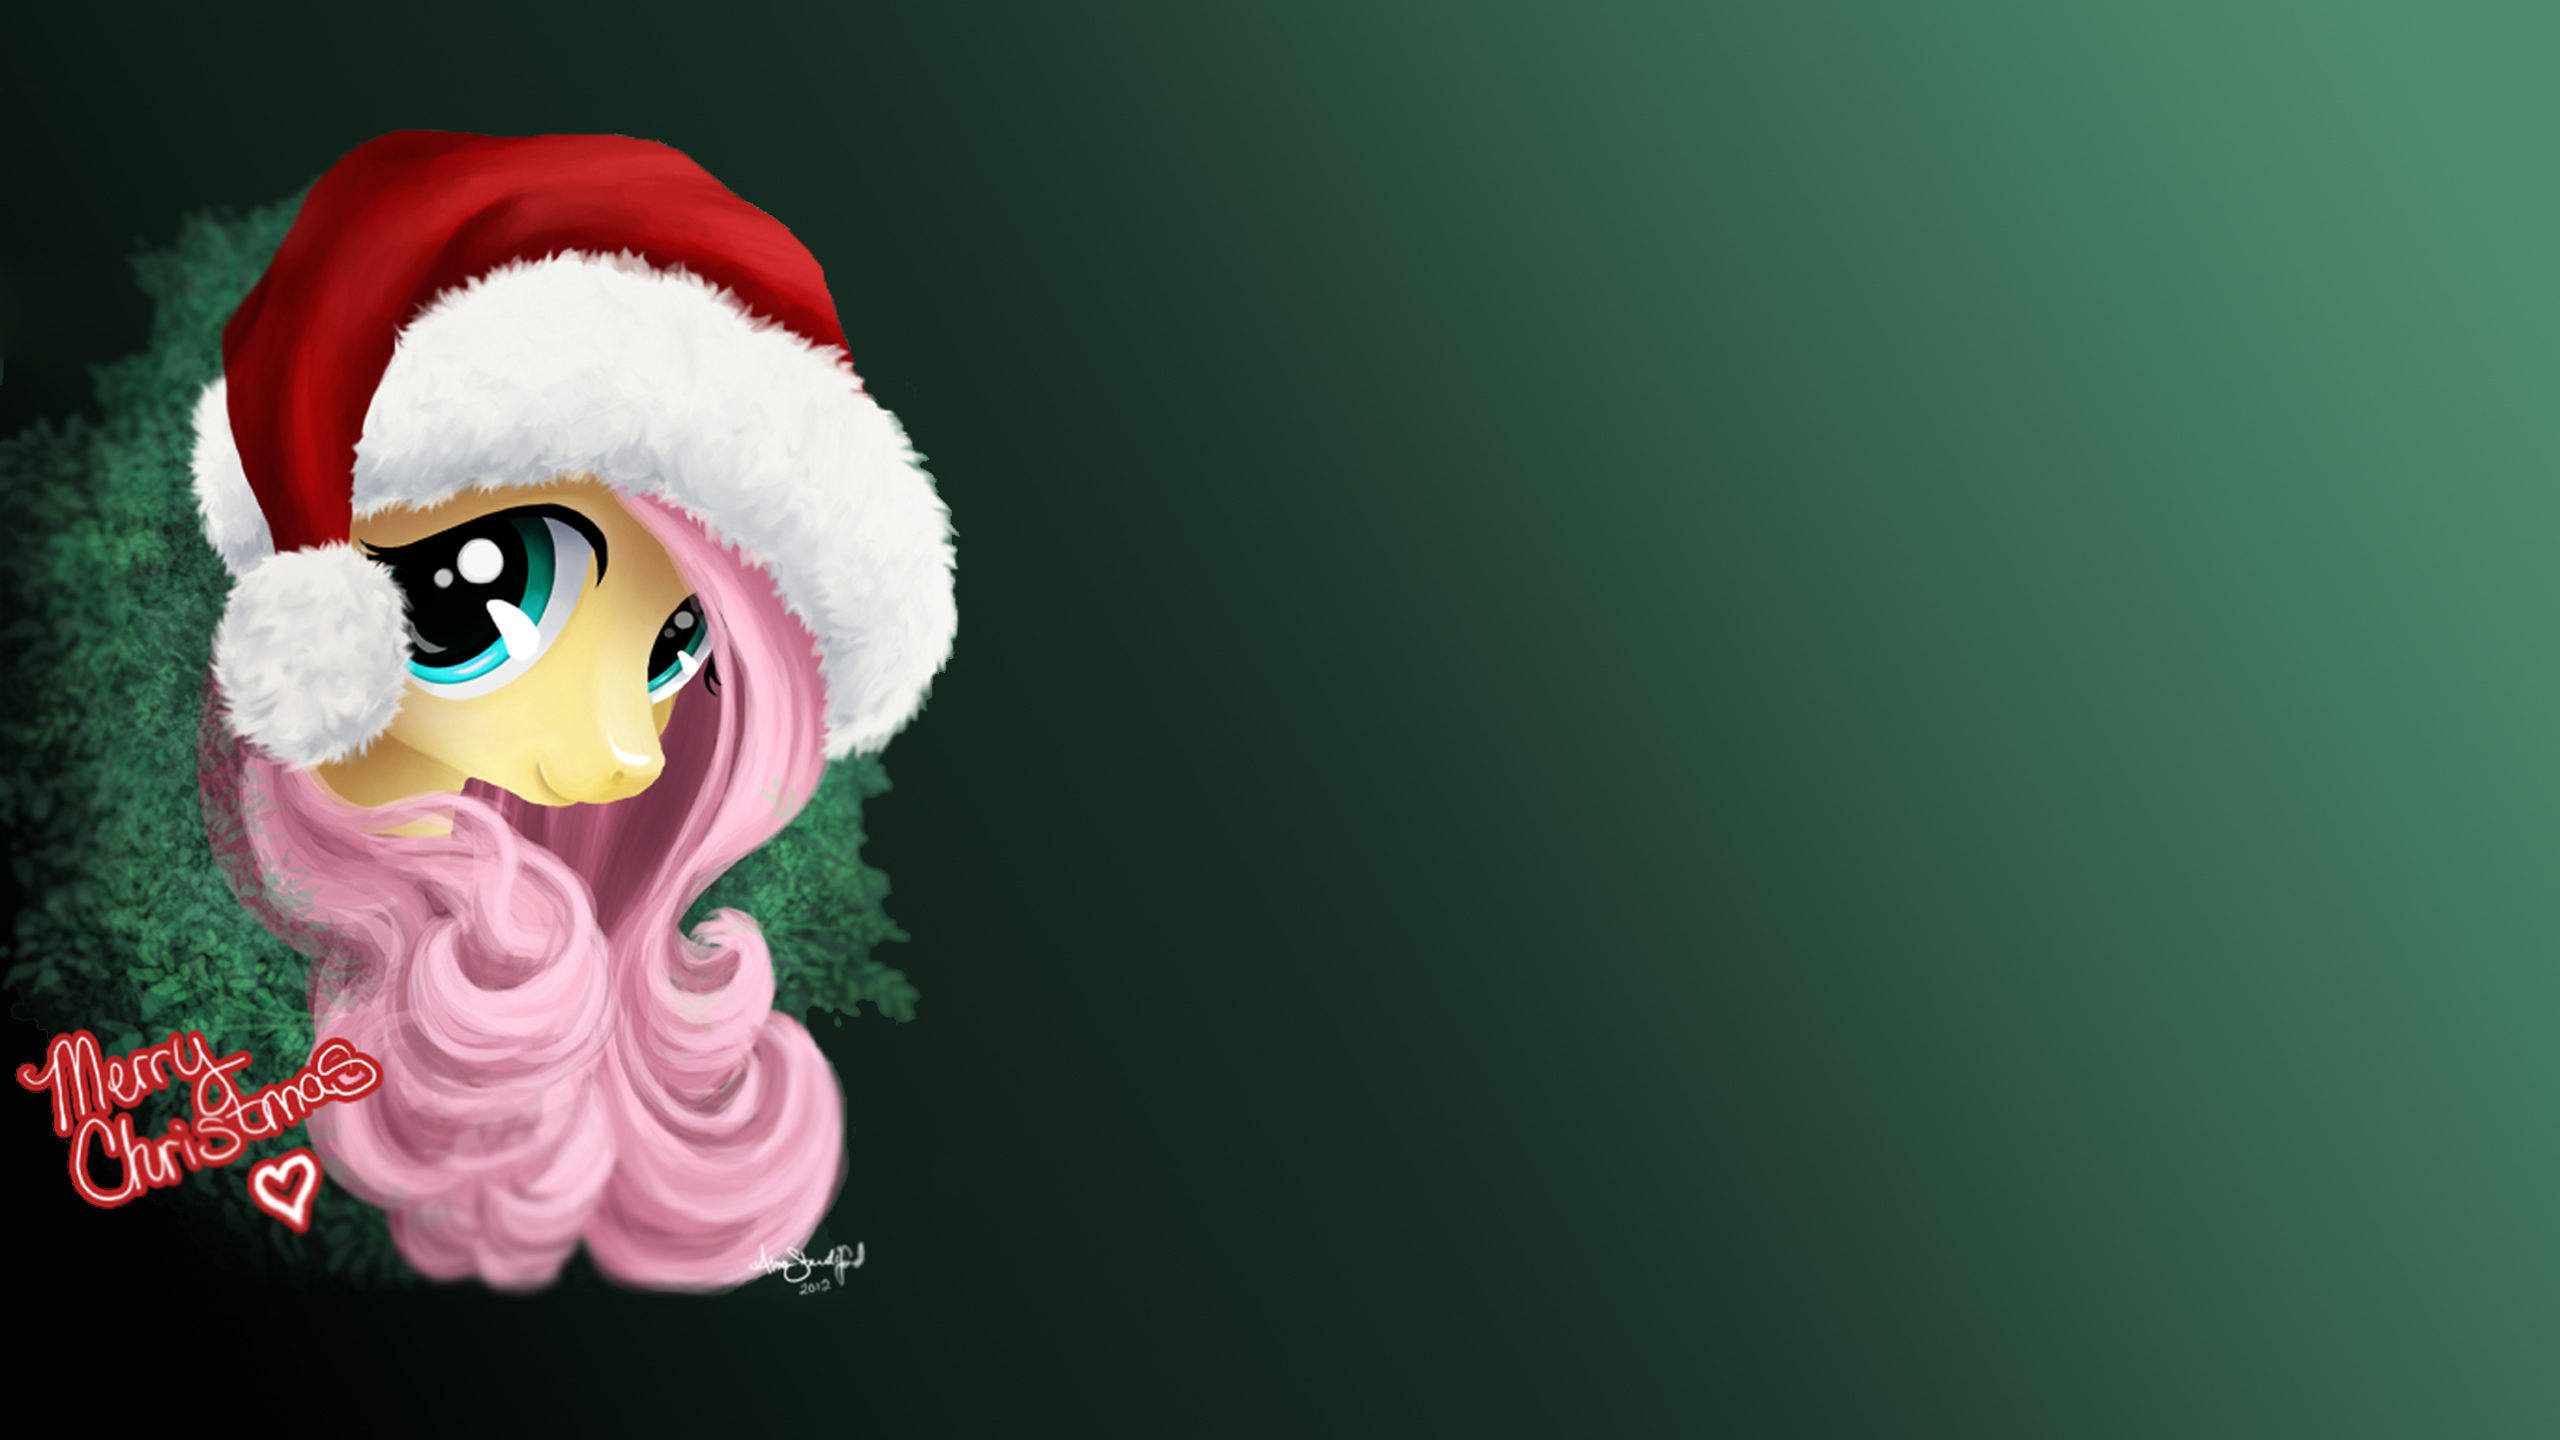 Merry Christmas from Fluttershy Wallpaper by Monanniverse and Tuyla